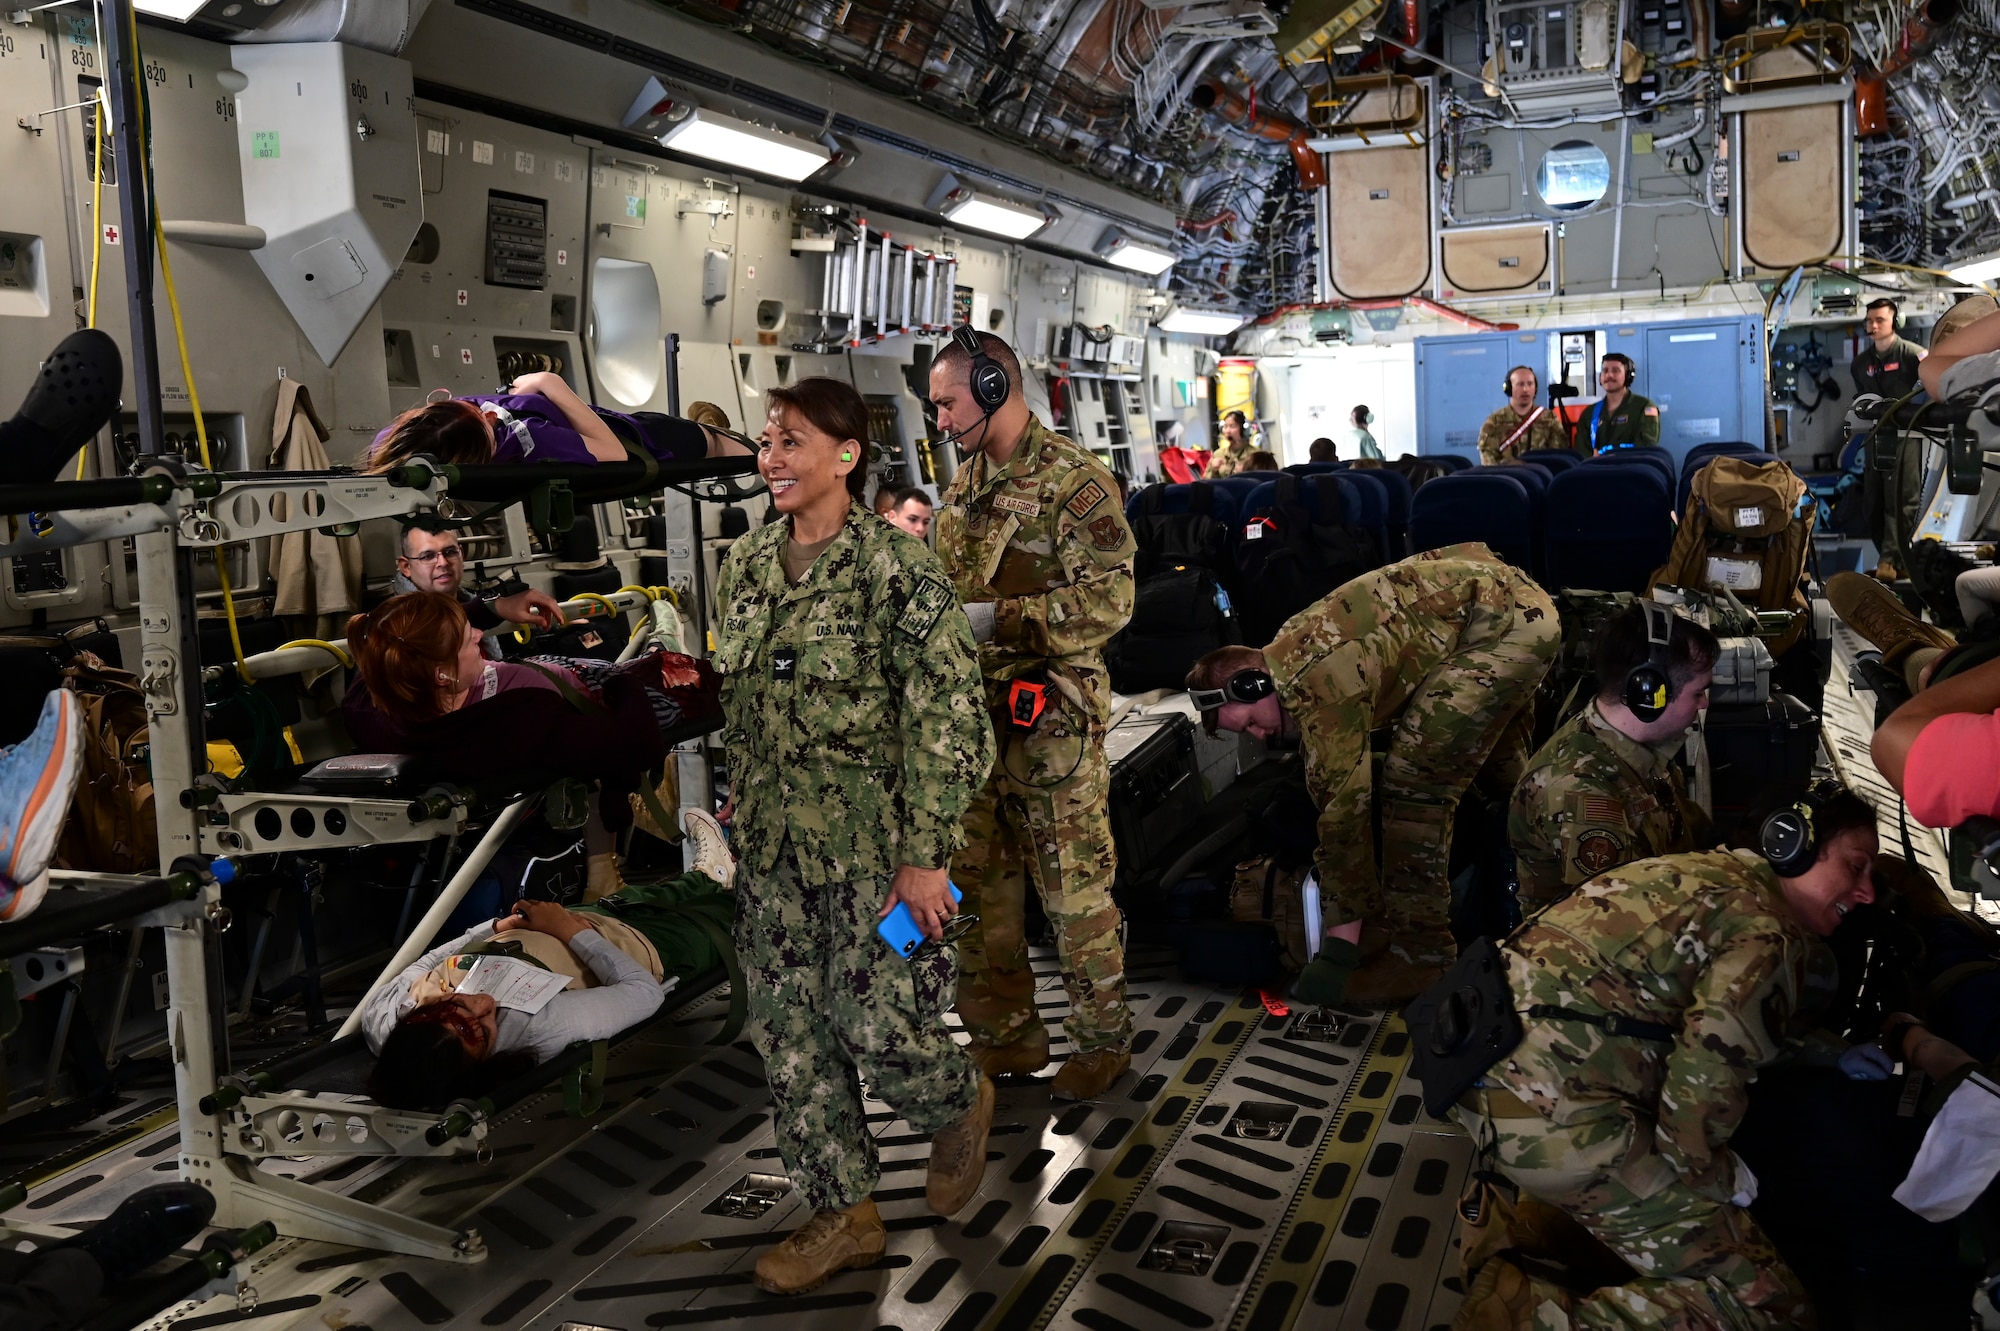 U.S. Airmen and Sailors work throughout a crowded C-17 Globemaster III that has been transformed into a flying ambulance full of various medical equipment and stretchers are stacked along the side of the interior of the aircraft.